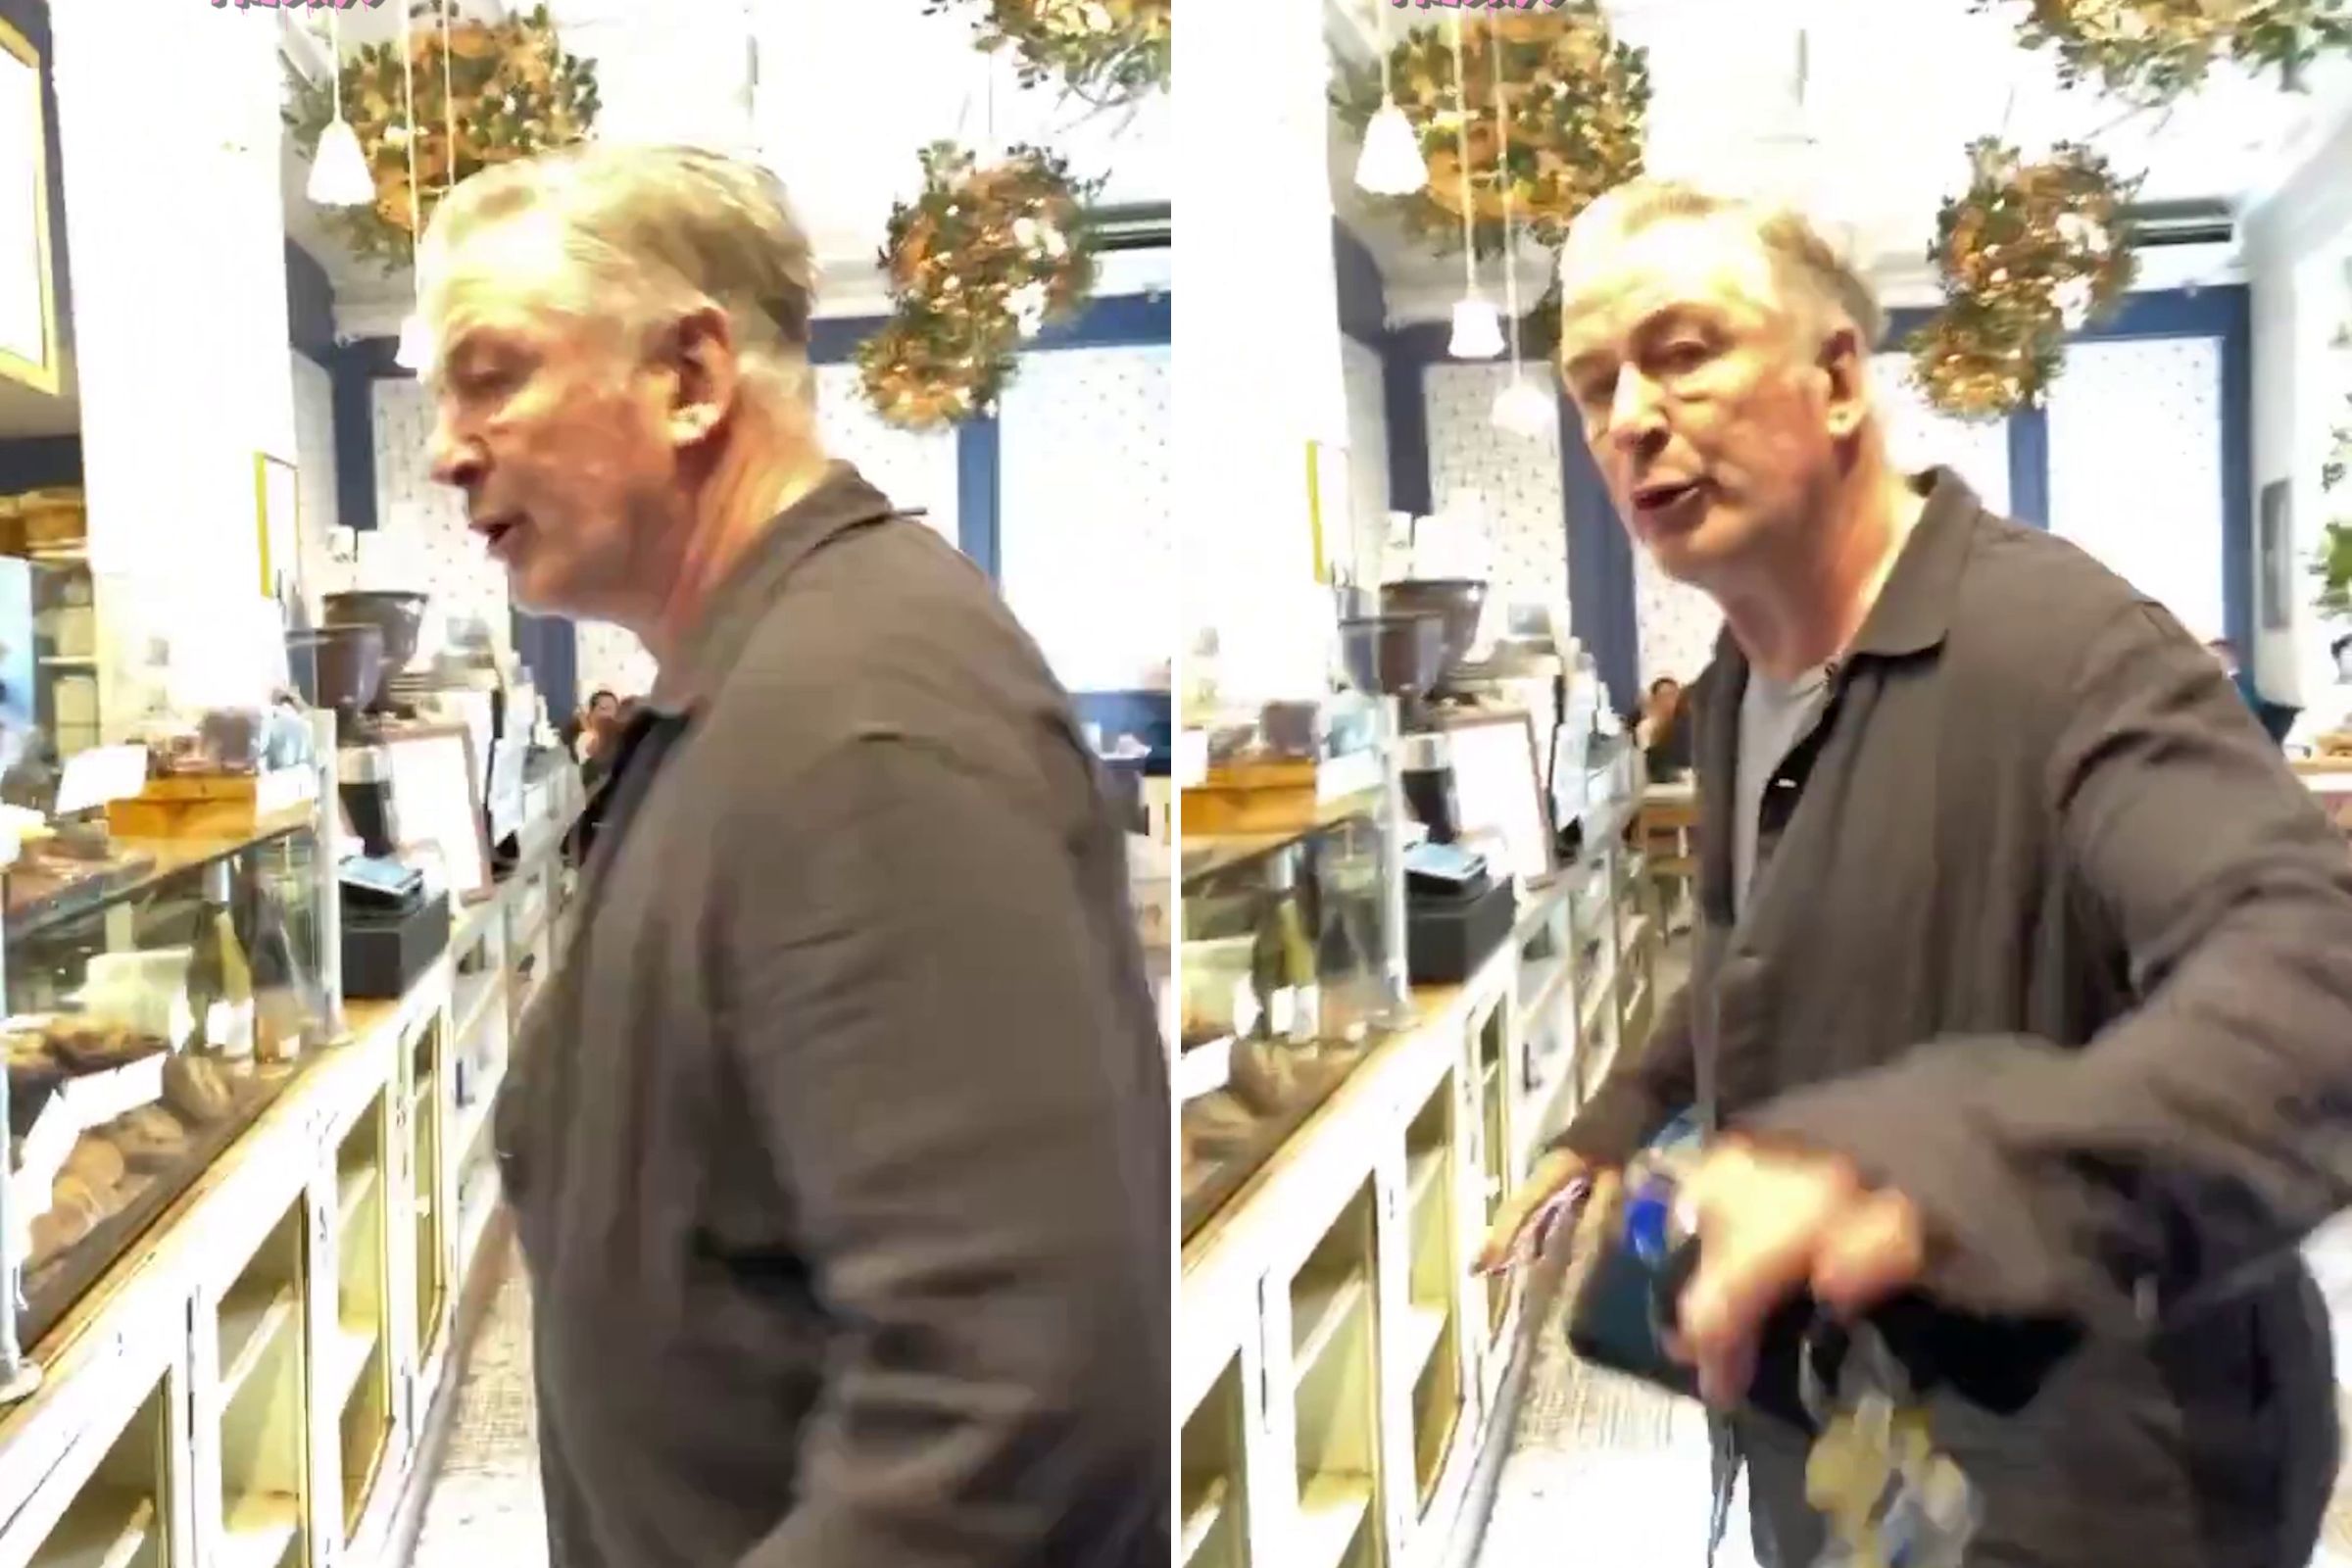 Exclusive: New Alec Baldwin Video Sheds Light on Clash With Protester